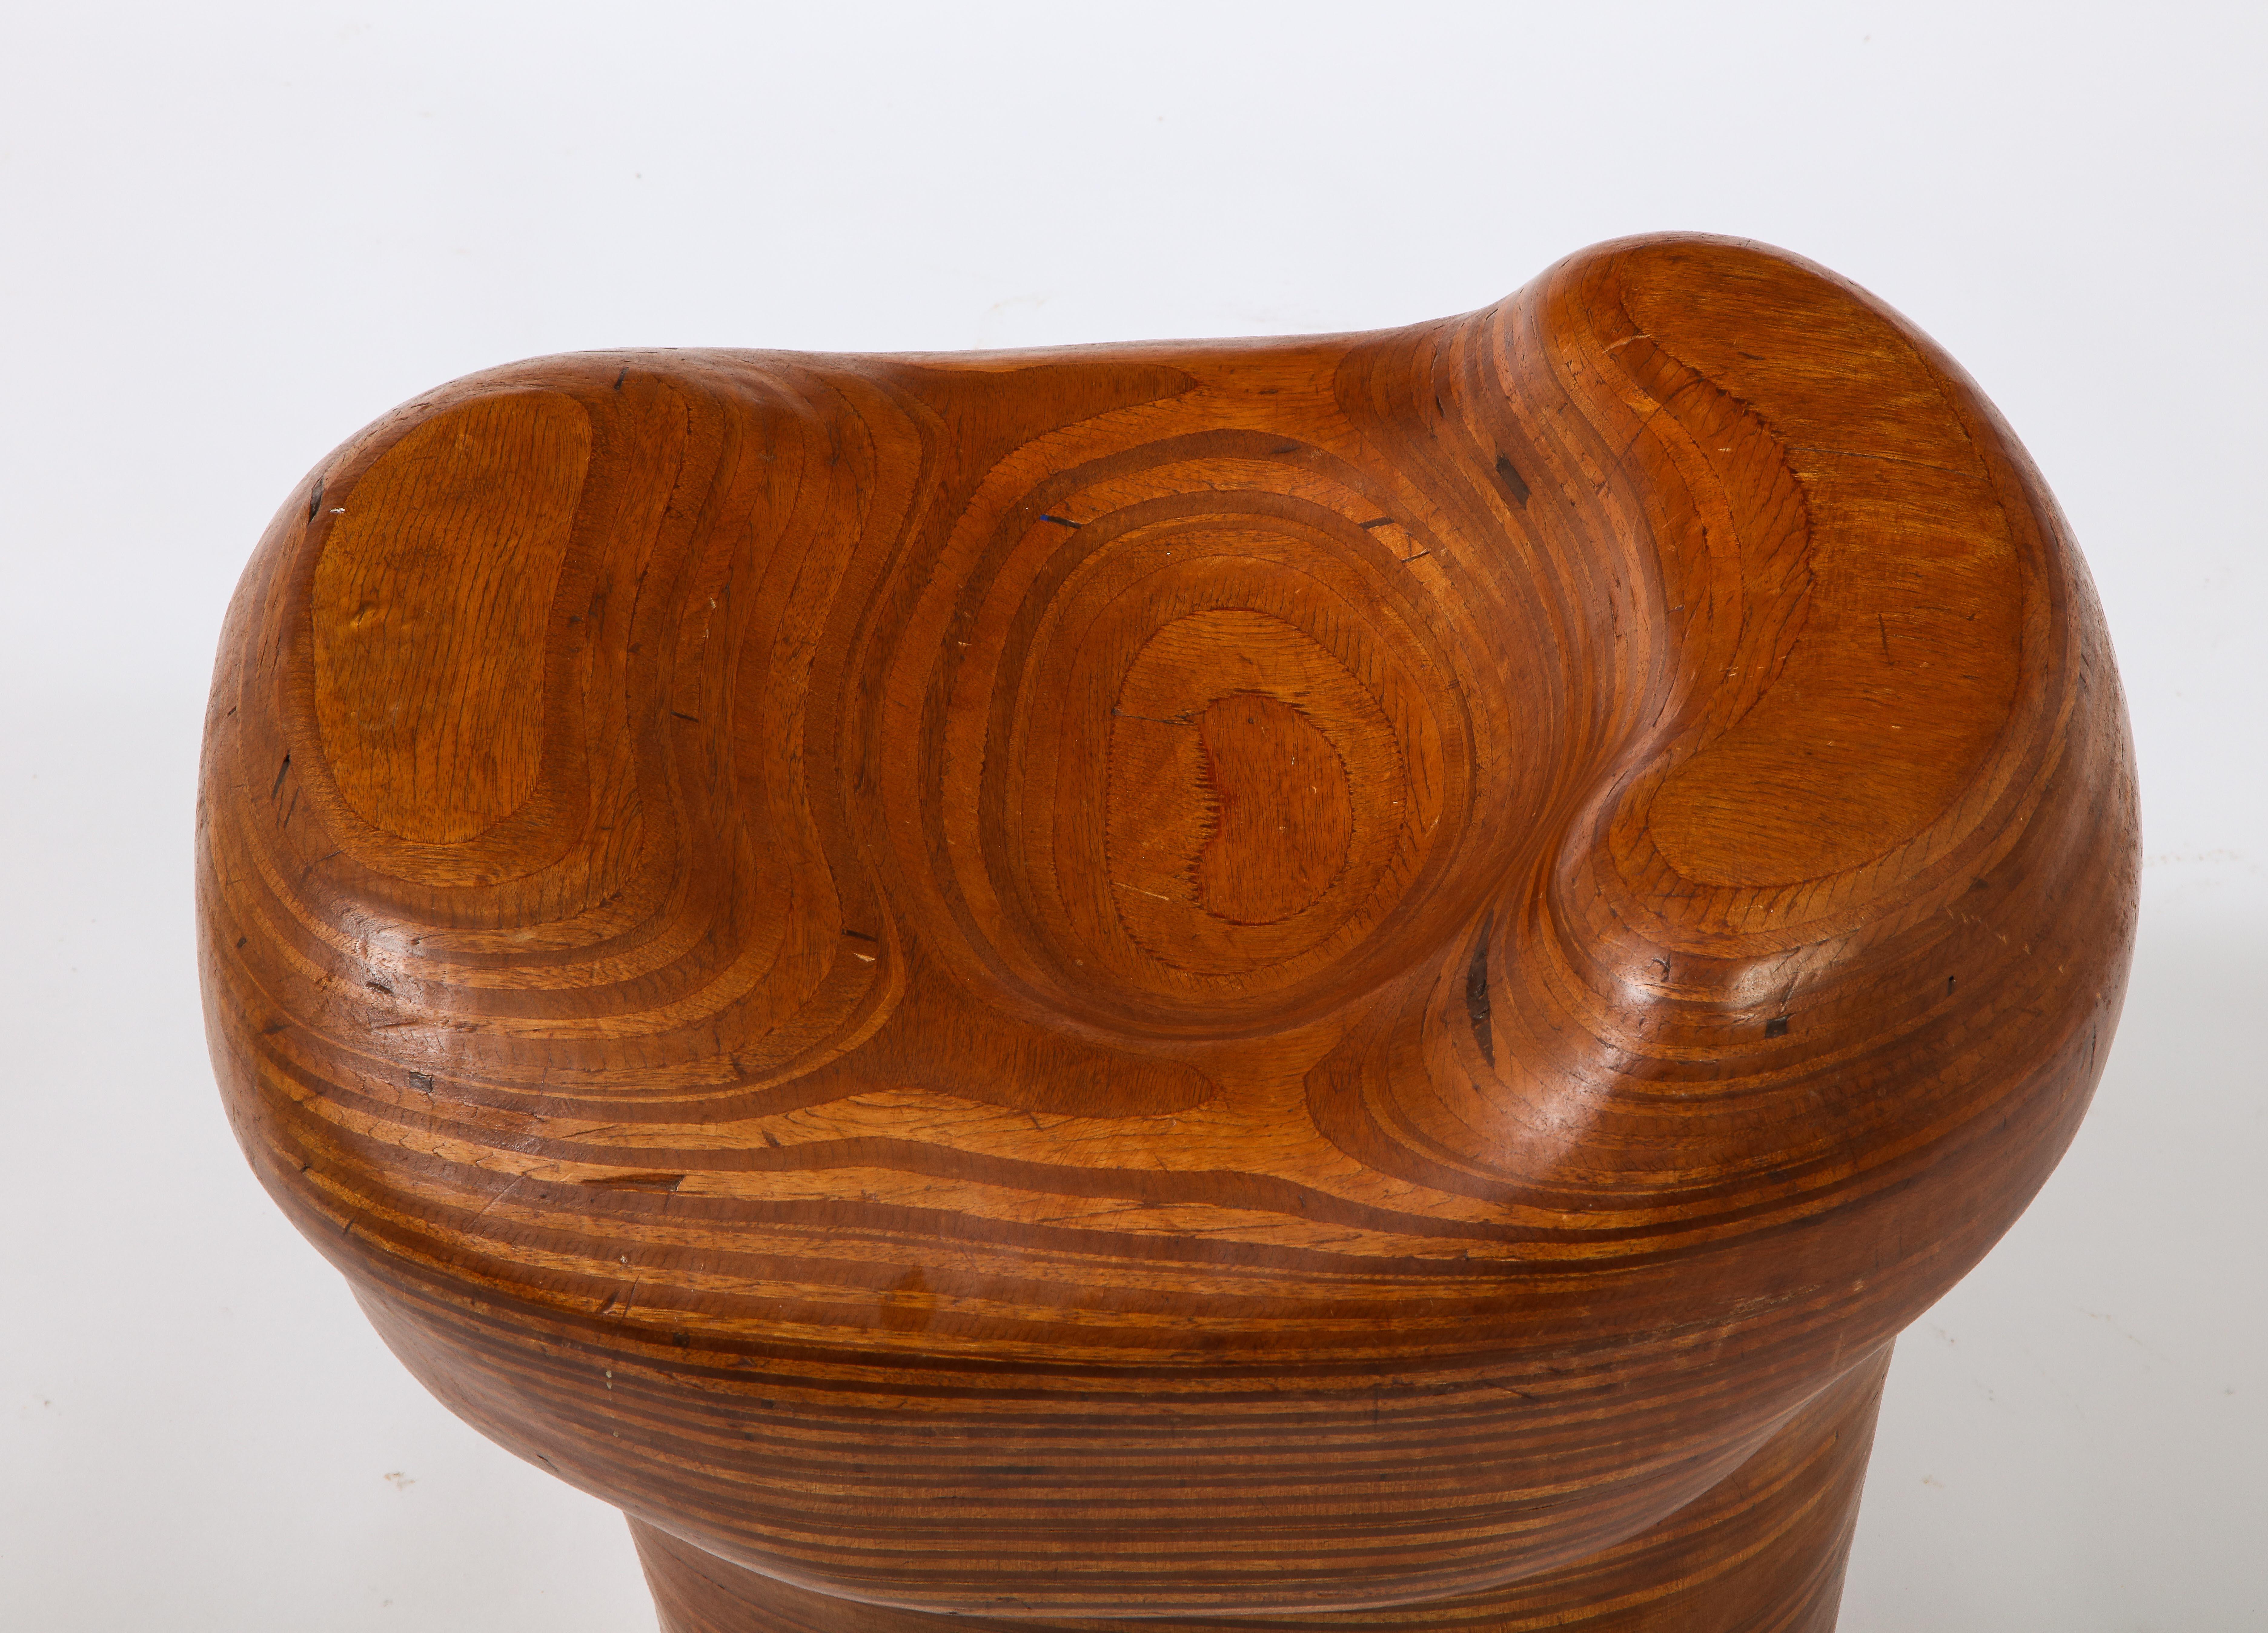 French Denis Cospen Biomorphic Stool in Laminated Wood, France 1960's For Sale